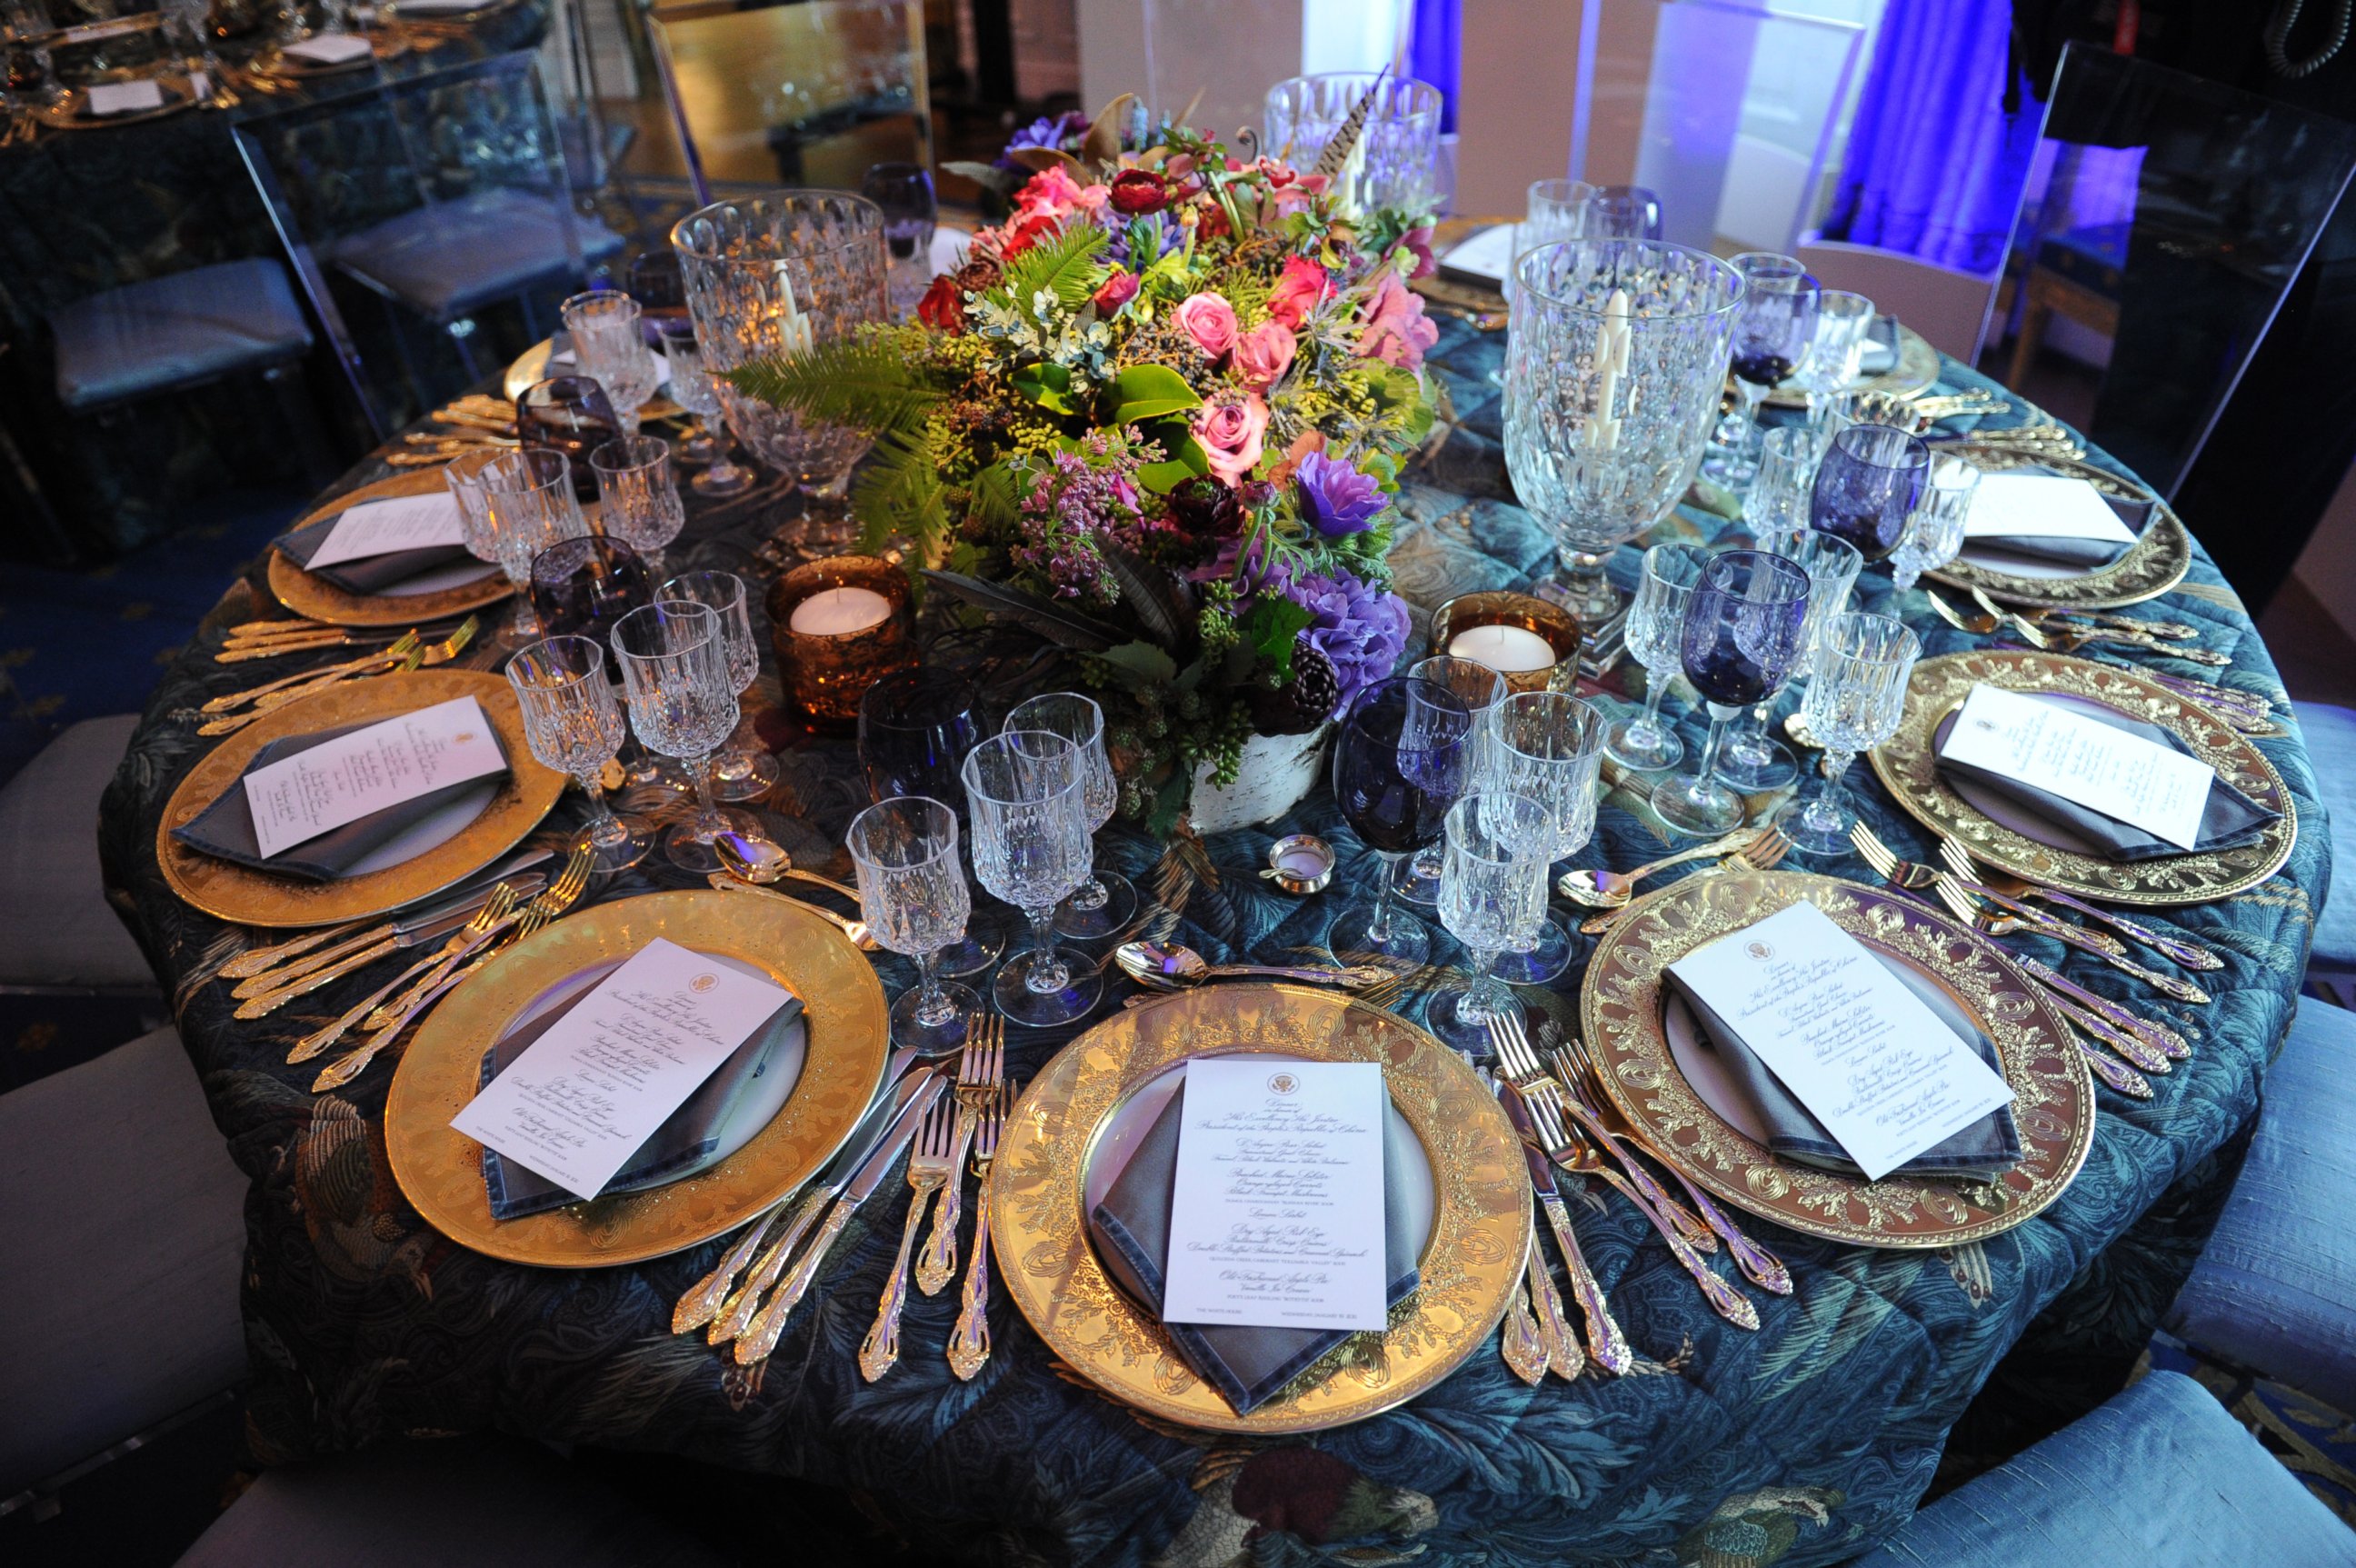 PHOTO: A table setting in the Blue Room at the White House State Dinner, Jan. 19, 2011 in Washington.